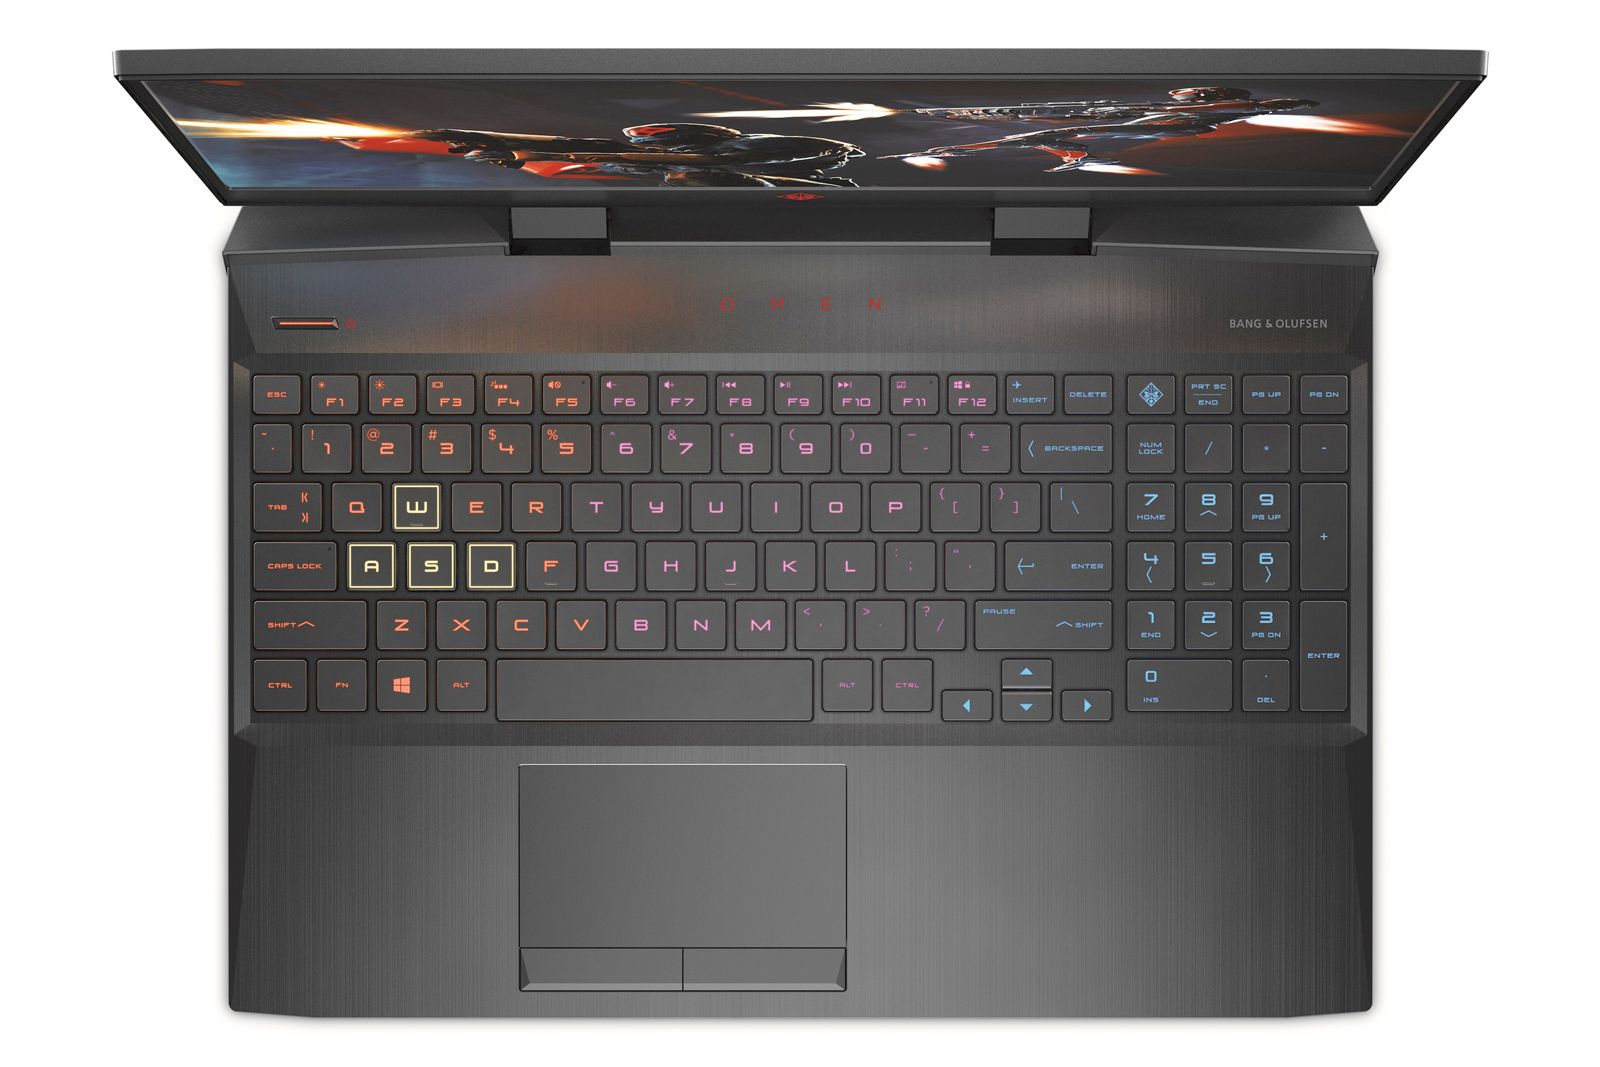 Hps Latest Omen 15 Is The First Laptop With A 240hz Display image 1